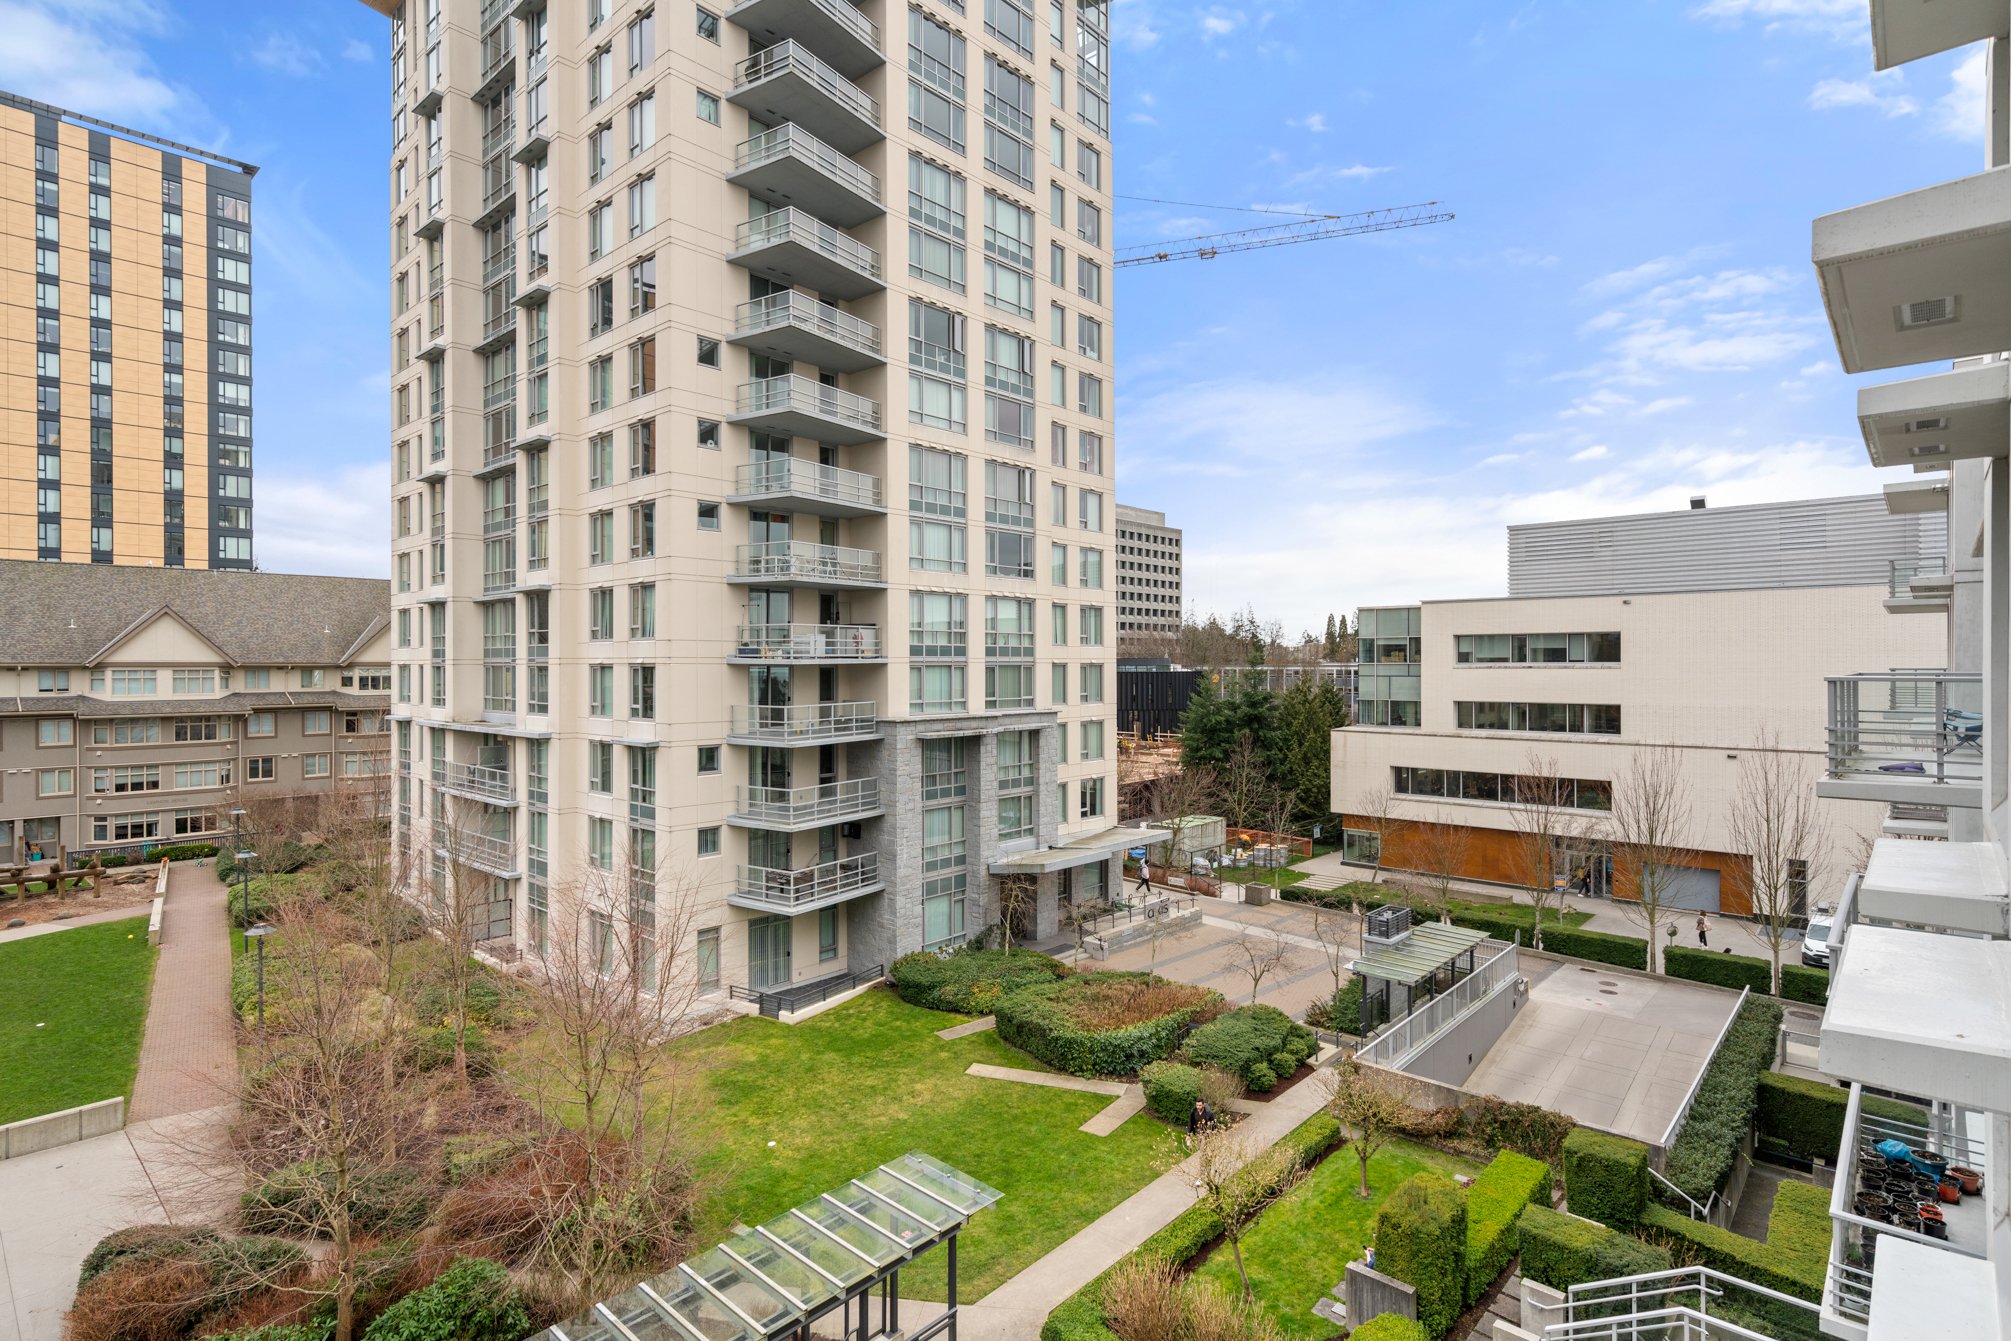 506 6080 Iona Dr Vancouver 04.jpg